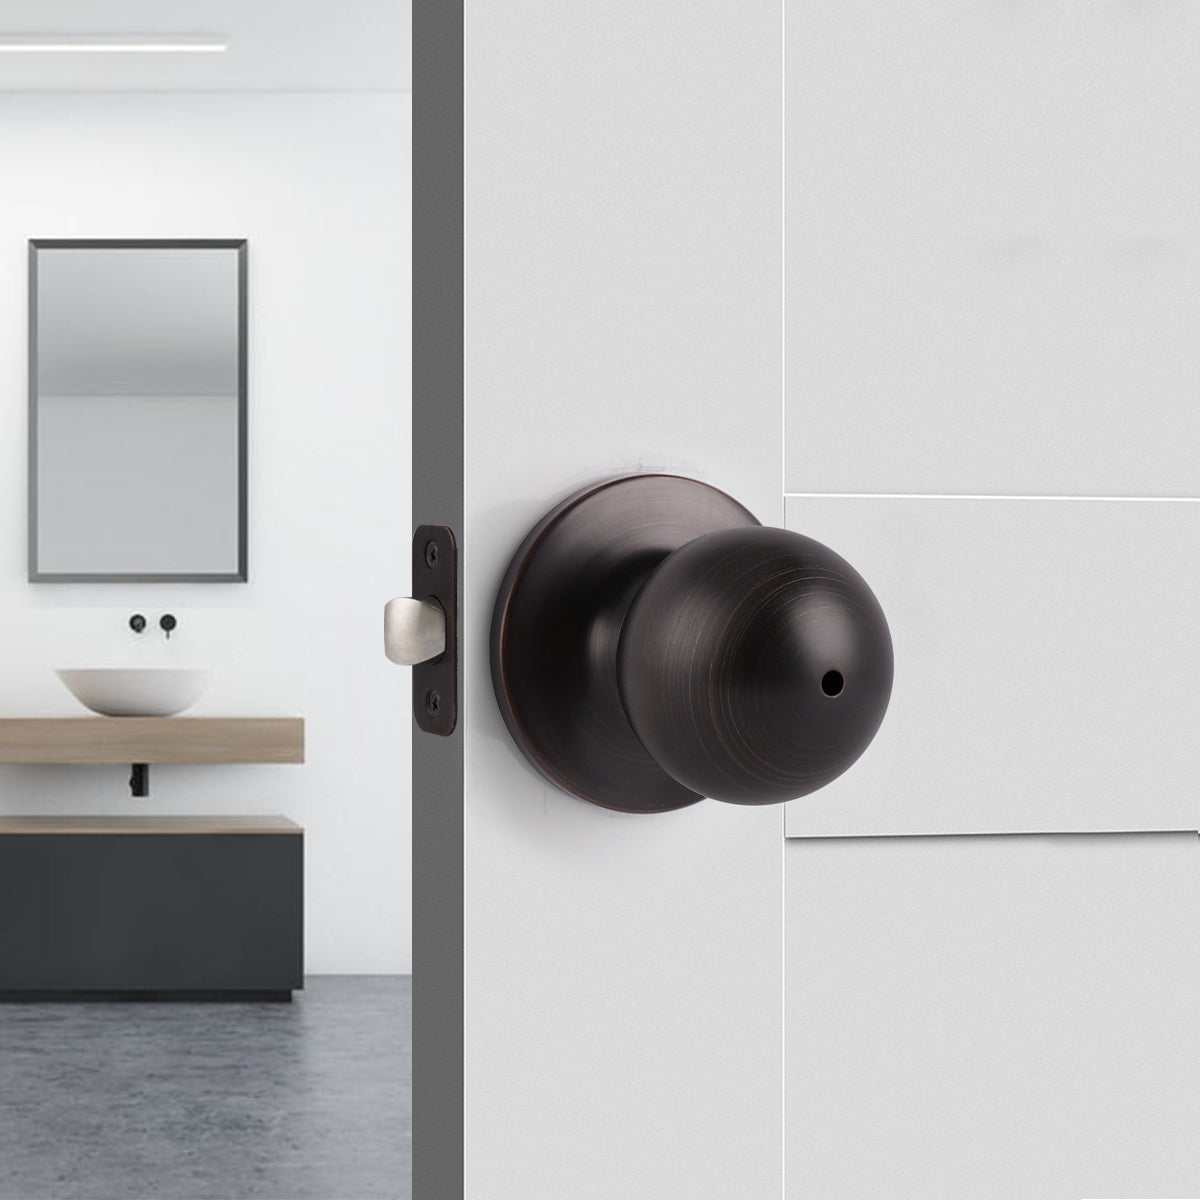 Single Connect Rod Round Ball Knobs Entry Lock /Privacy/Passage/Dummy Knob, Oil Rubbed Bronze Finish DL5763ORB - Probrico